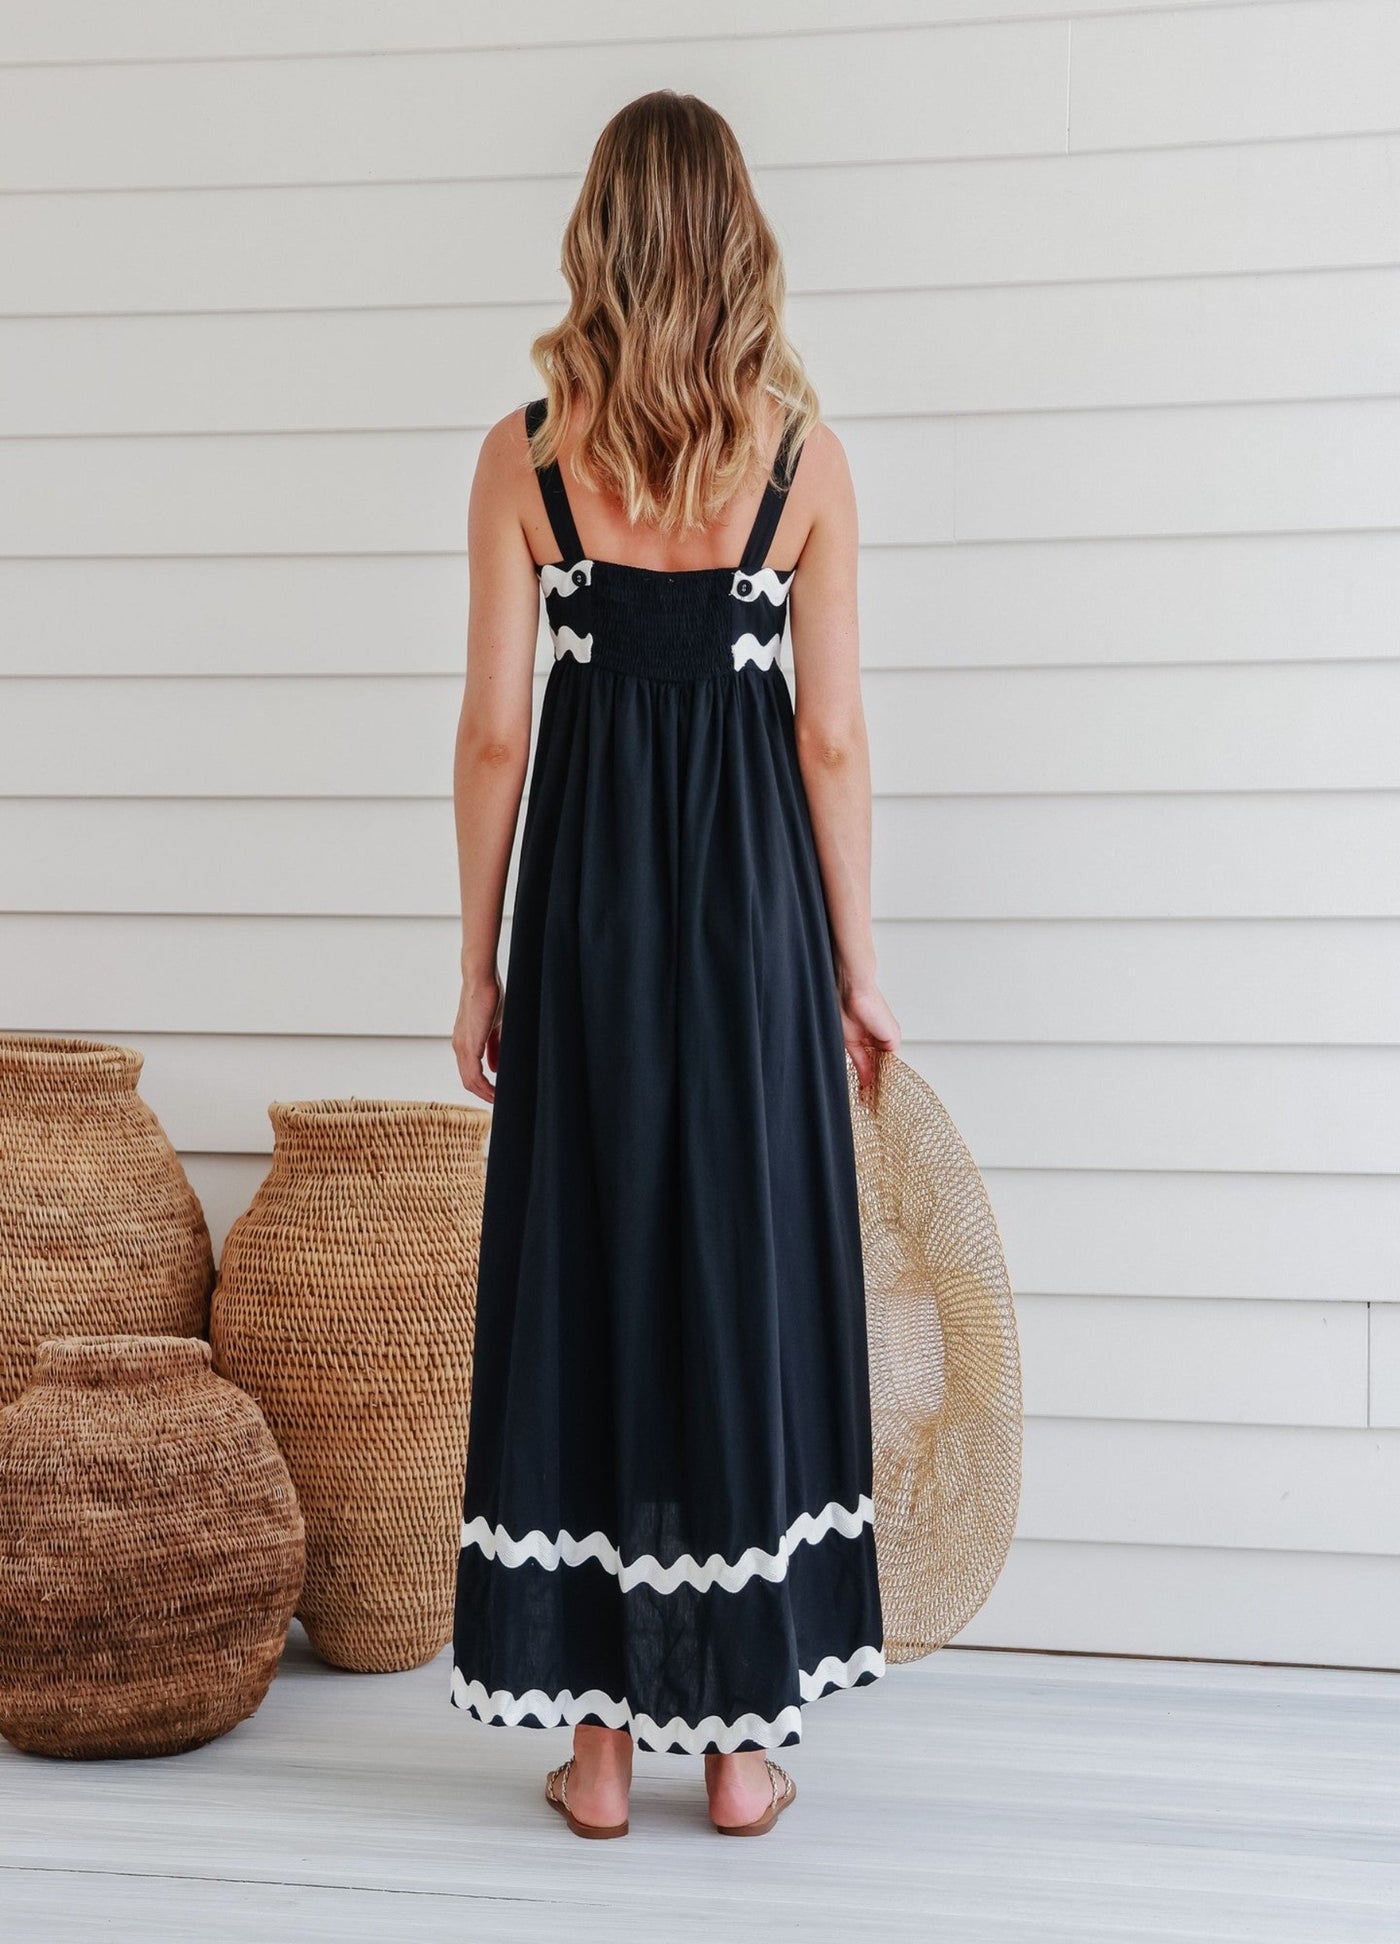 Black and white dress with Ric Rac Detailing